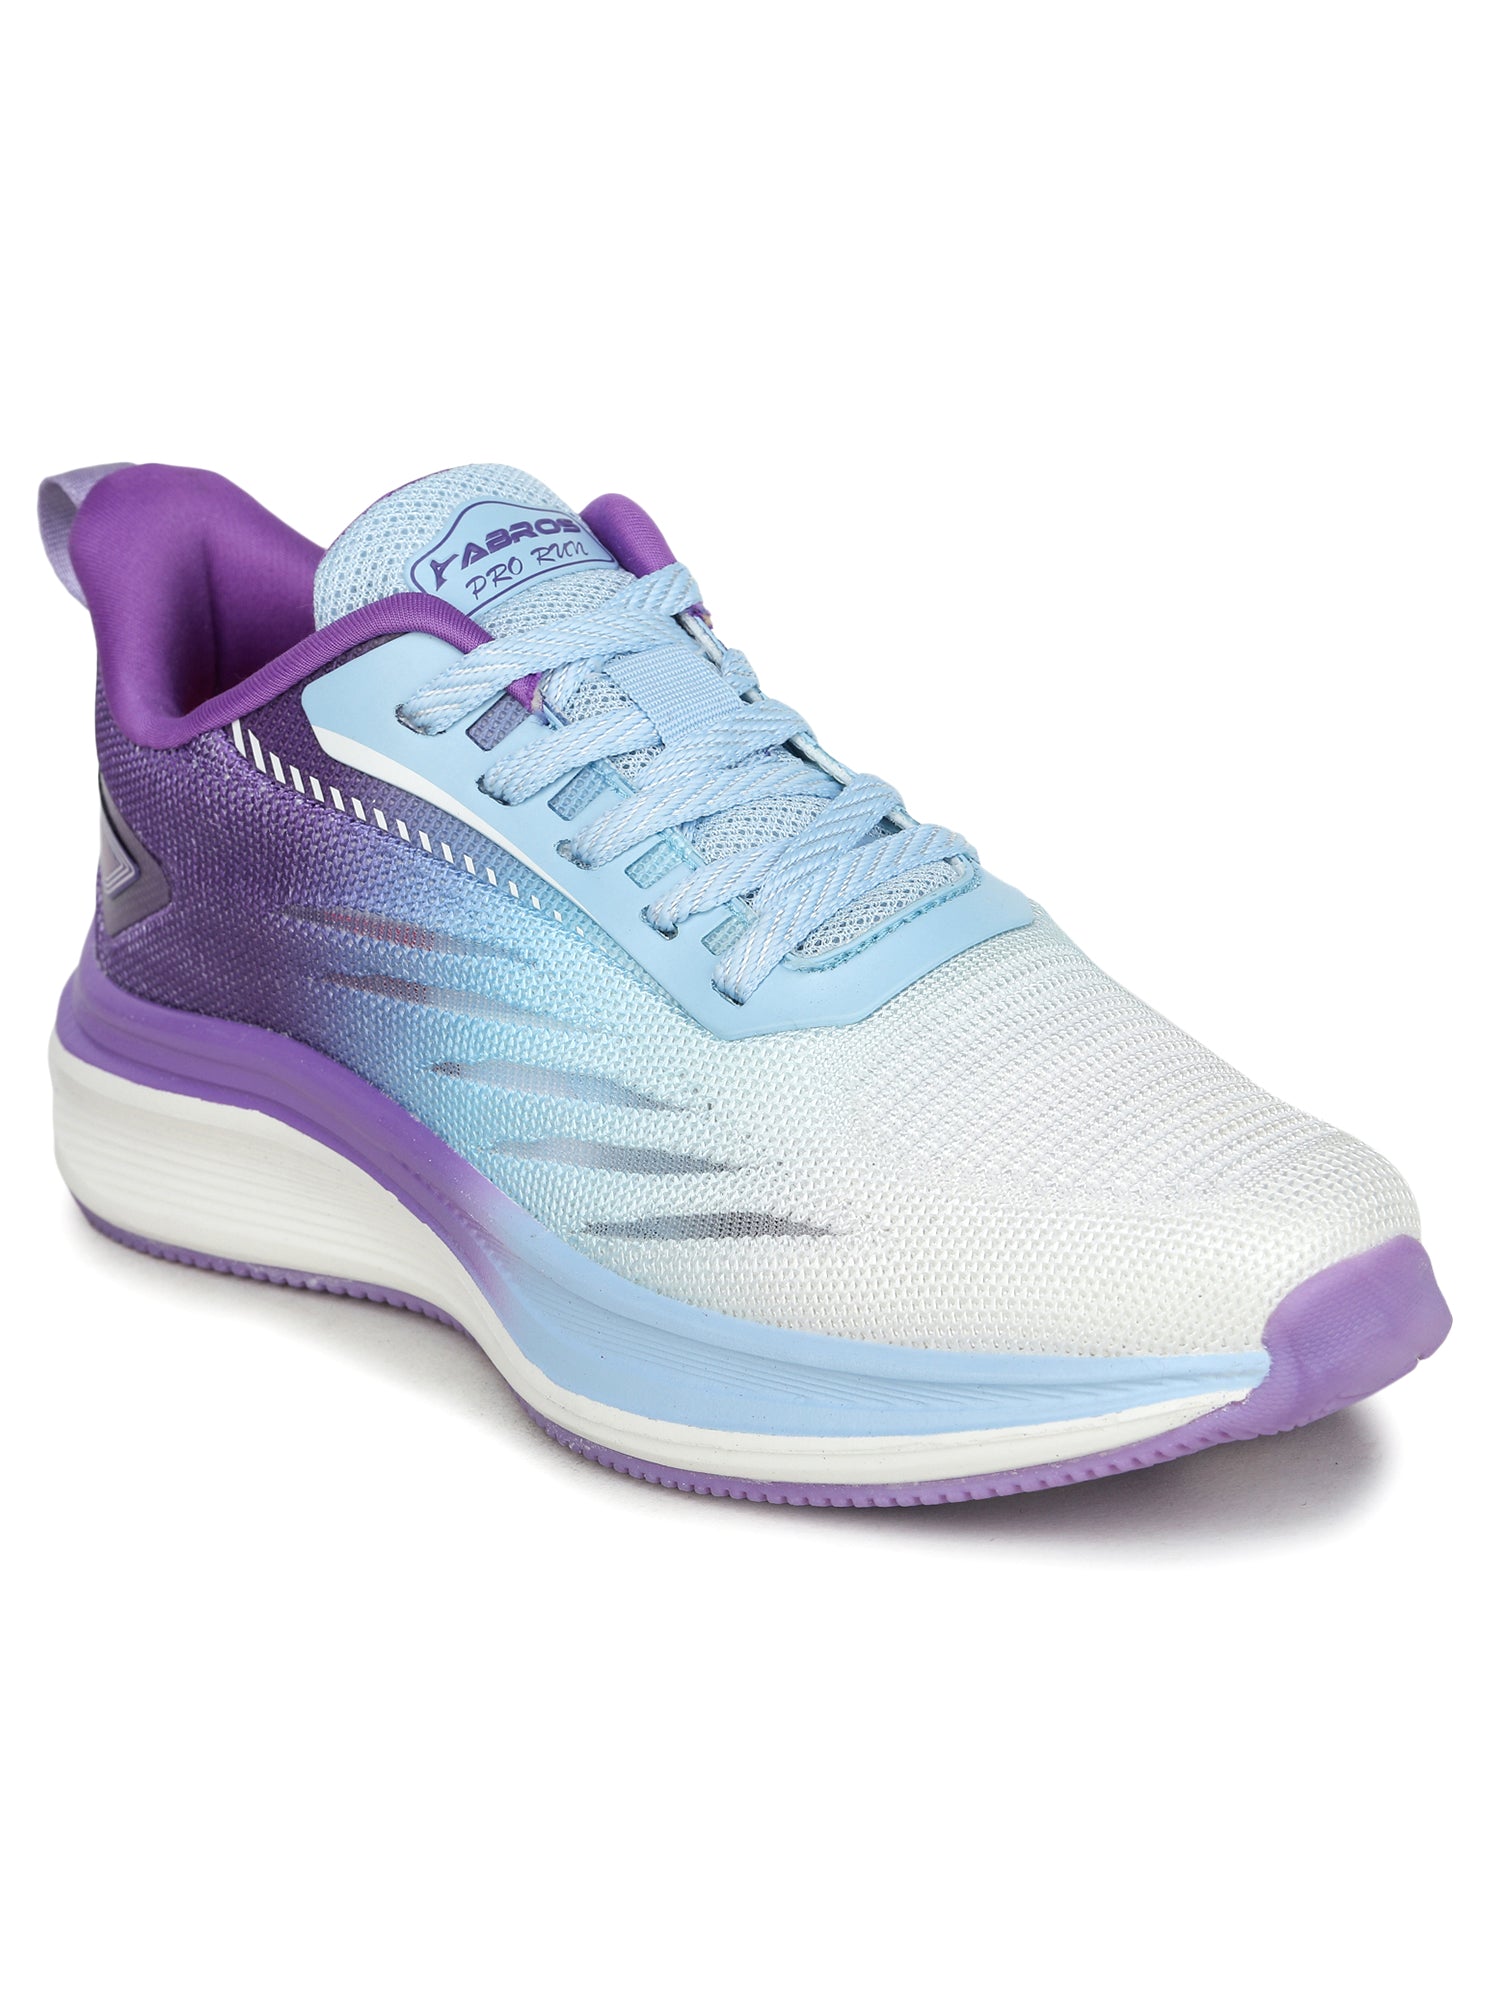 ABROS SWAN SPORTS SHOES FOR WOMEN